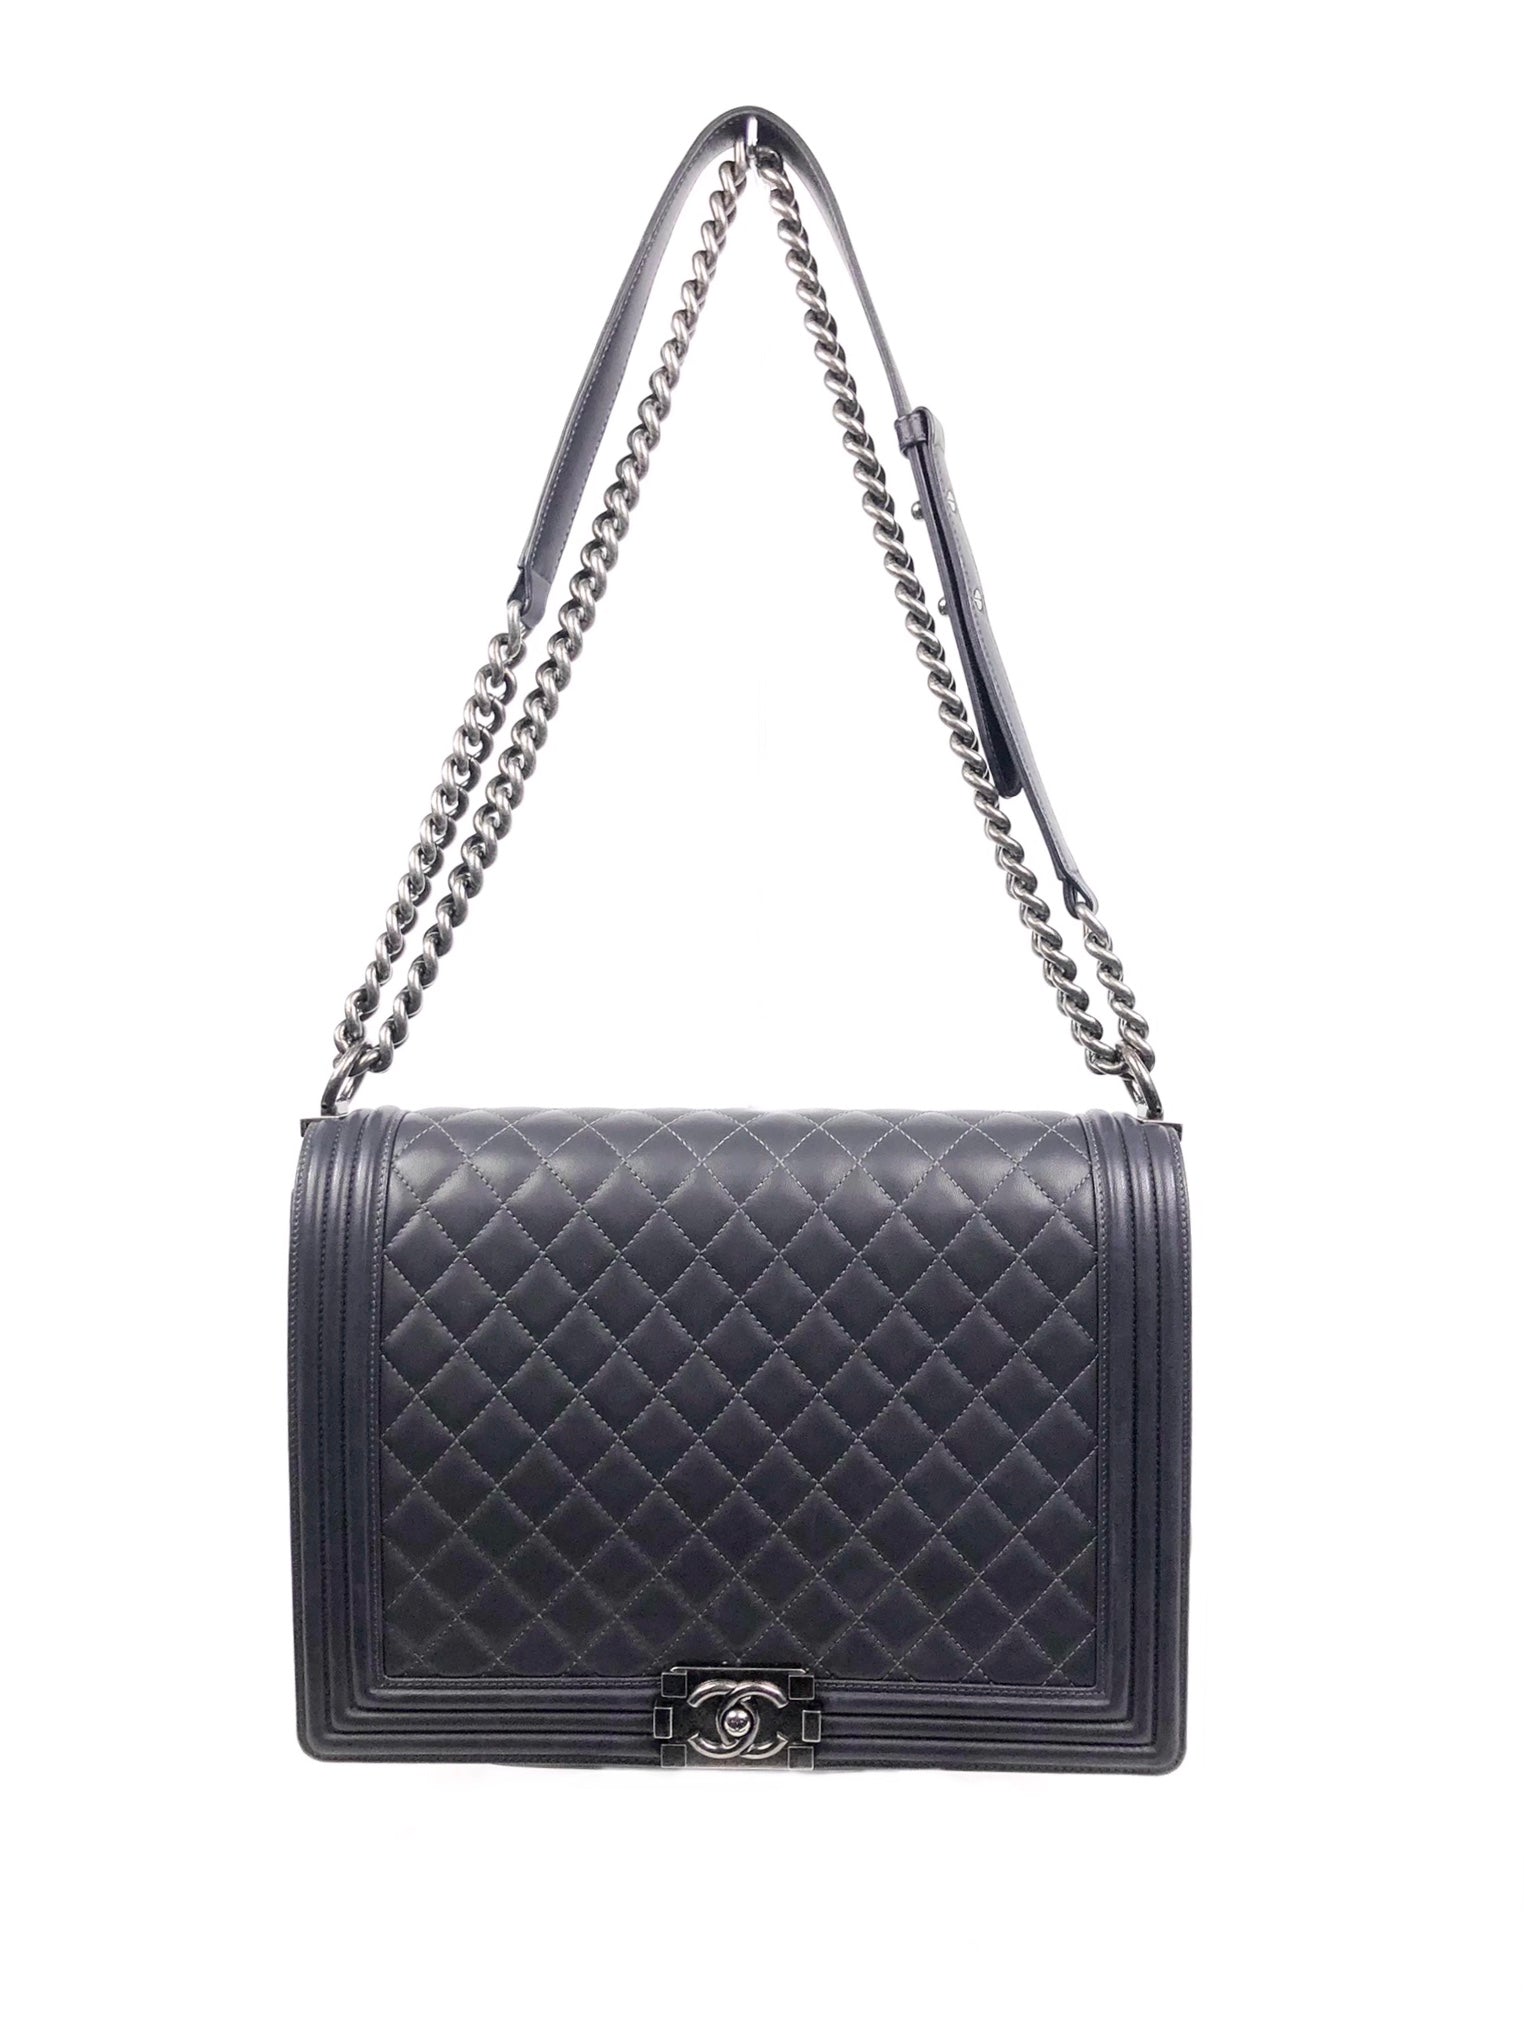 CHANEL, Bags, Chanel Black Goatskin Double Carry Multichain Quilted  Classic Flap Bag